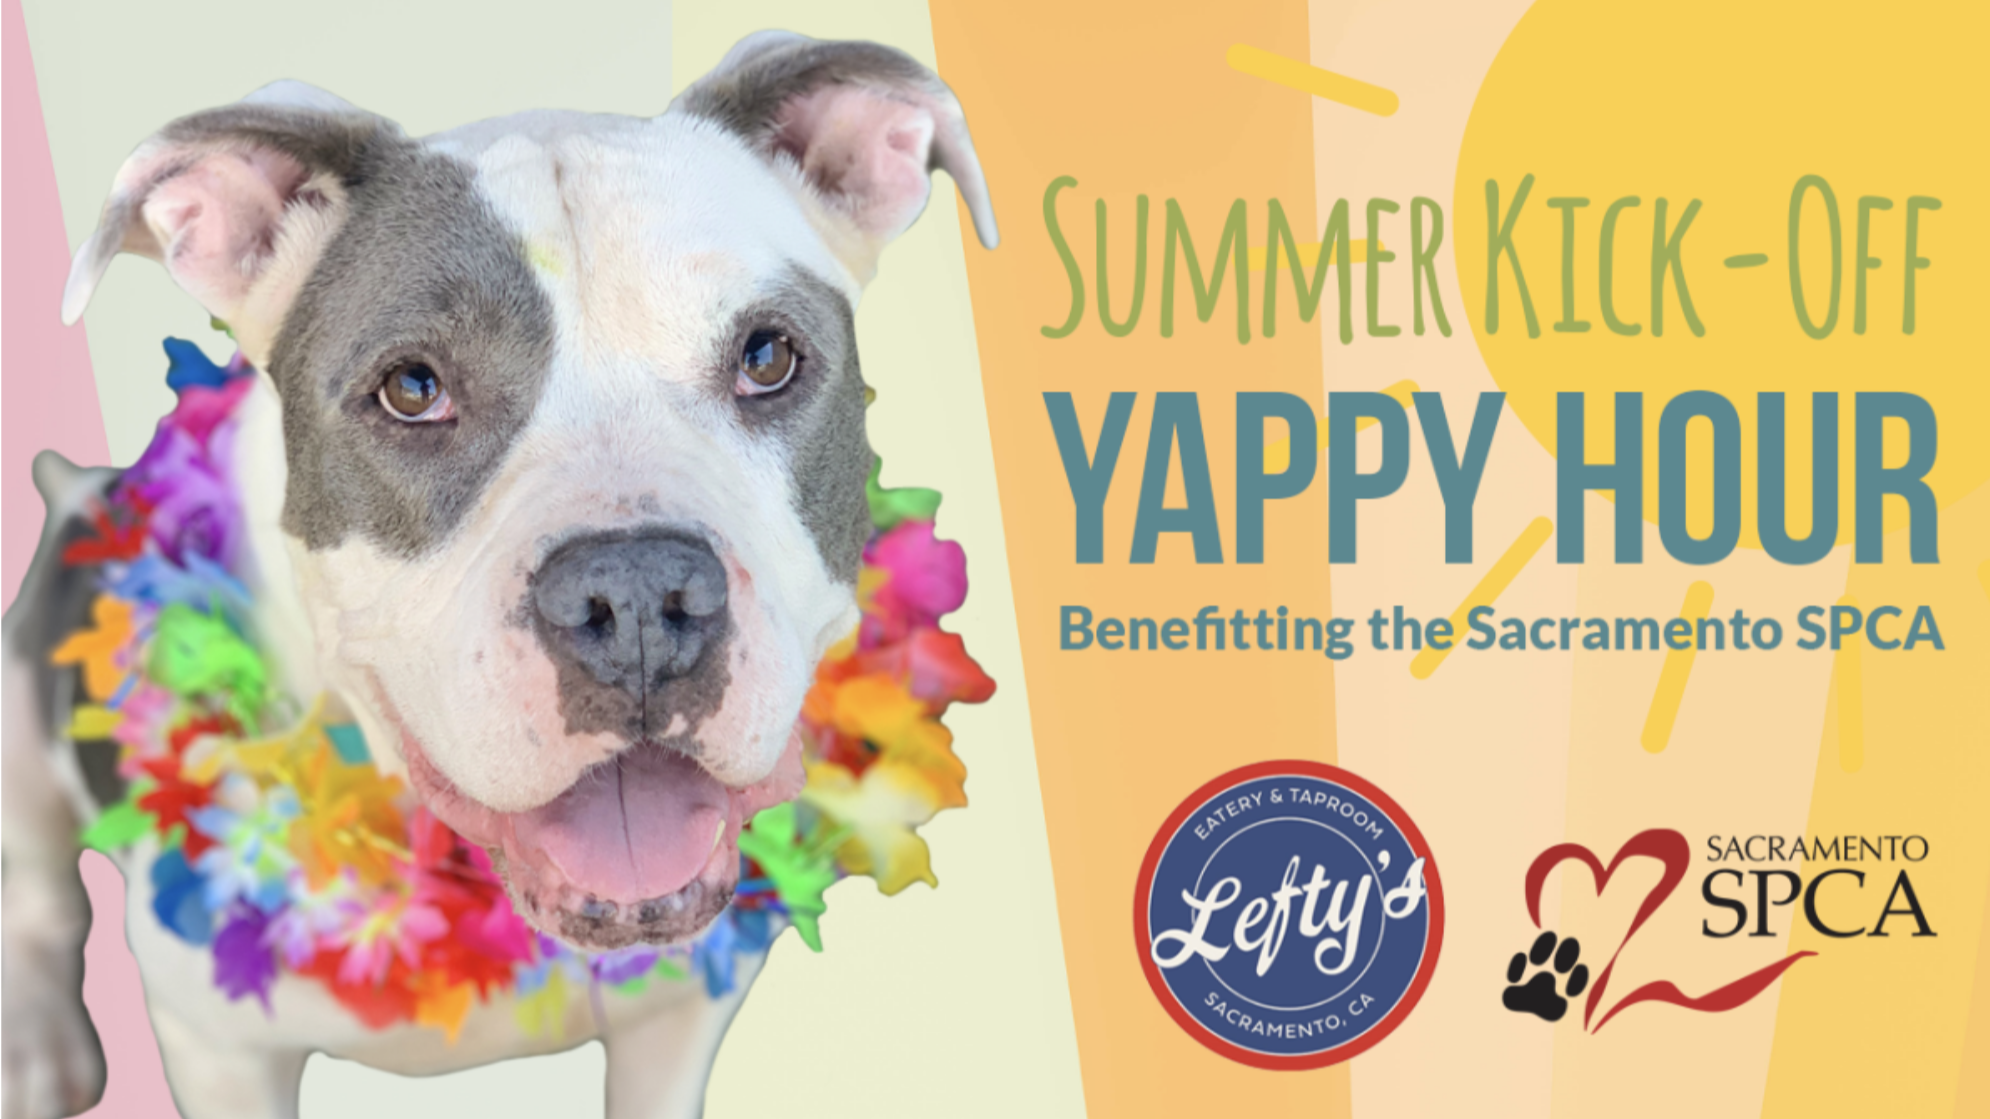 A dog wearing a colorful lei is pictured on a flyer promoting the "Summer Kick-Off Yappy Hour." This event supports the Sacramento SPCA and is hosted by Lefty’s Taproom. The flyer displays logos for both Lefty's Taproom and the Sacramento SPCA.